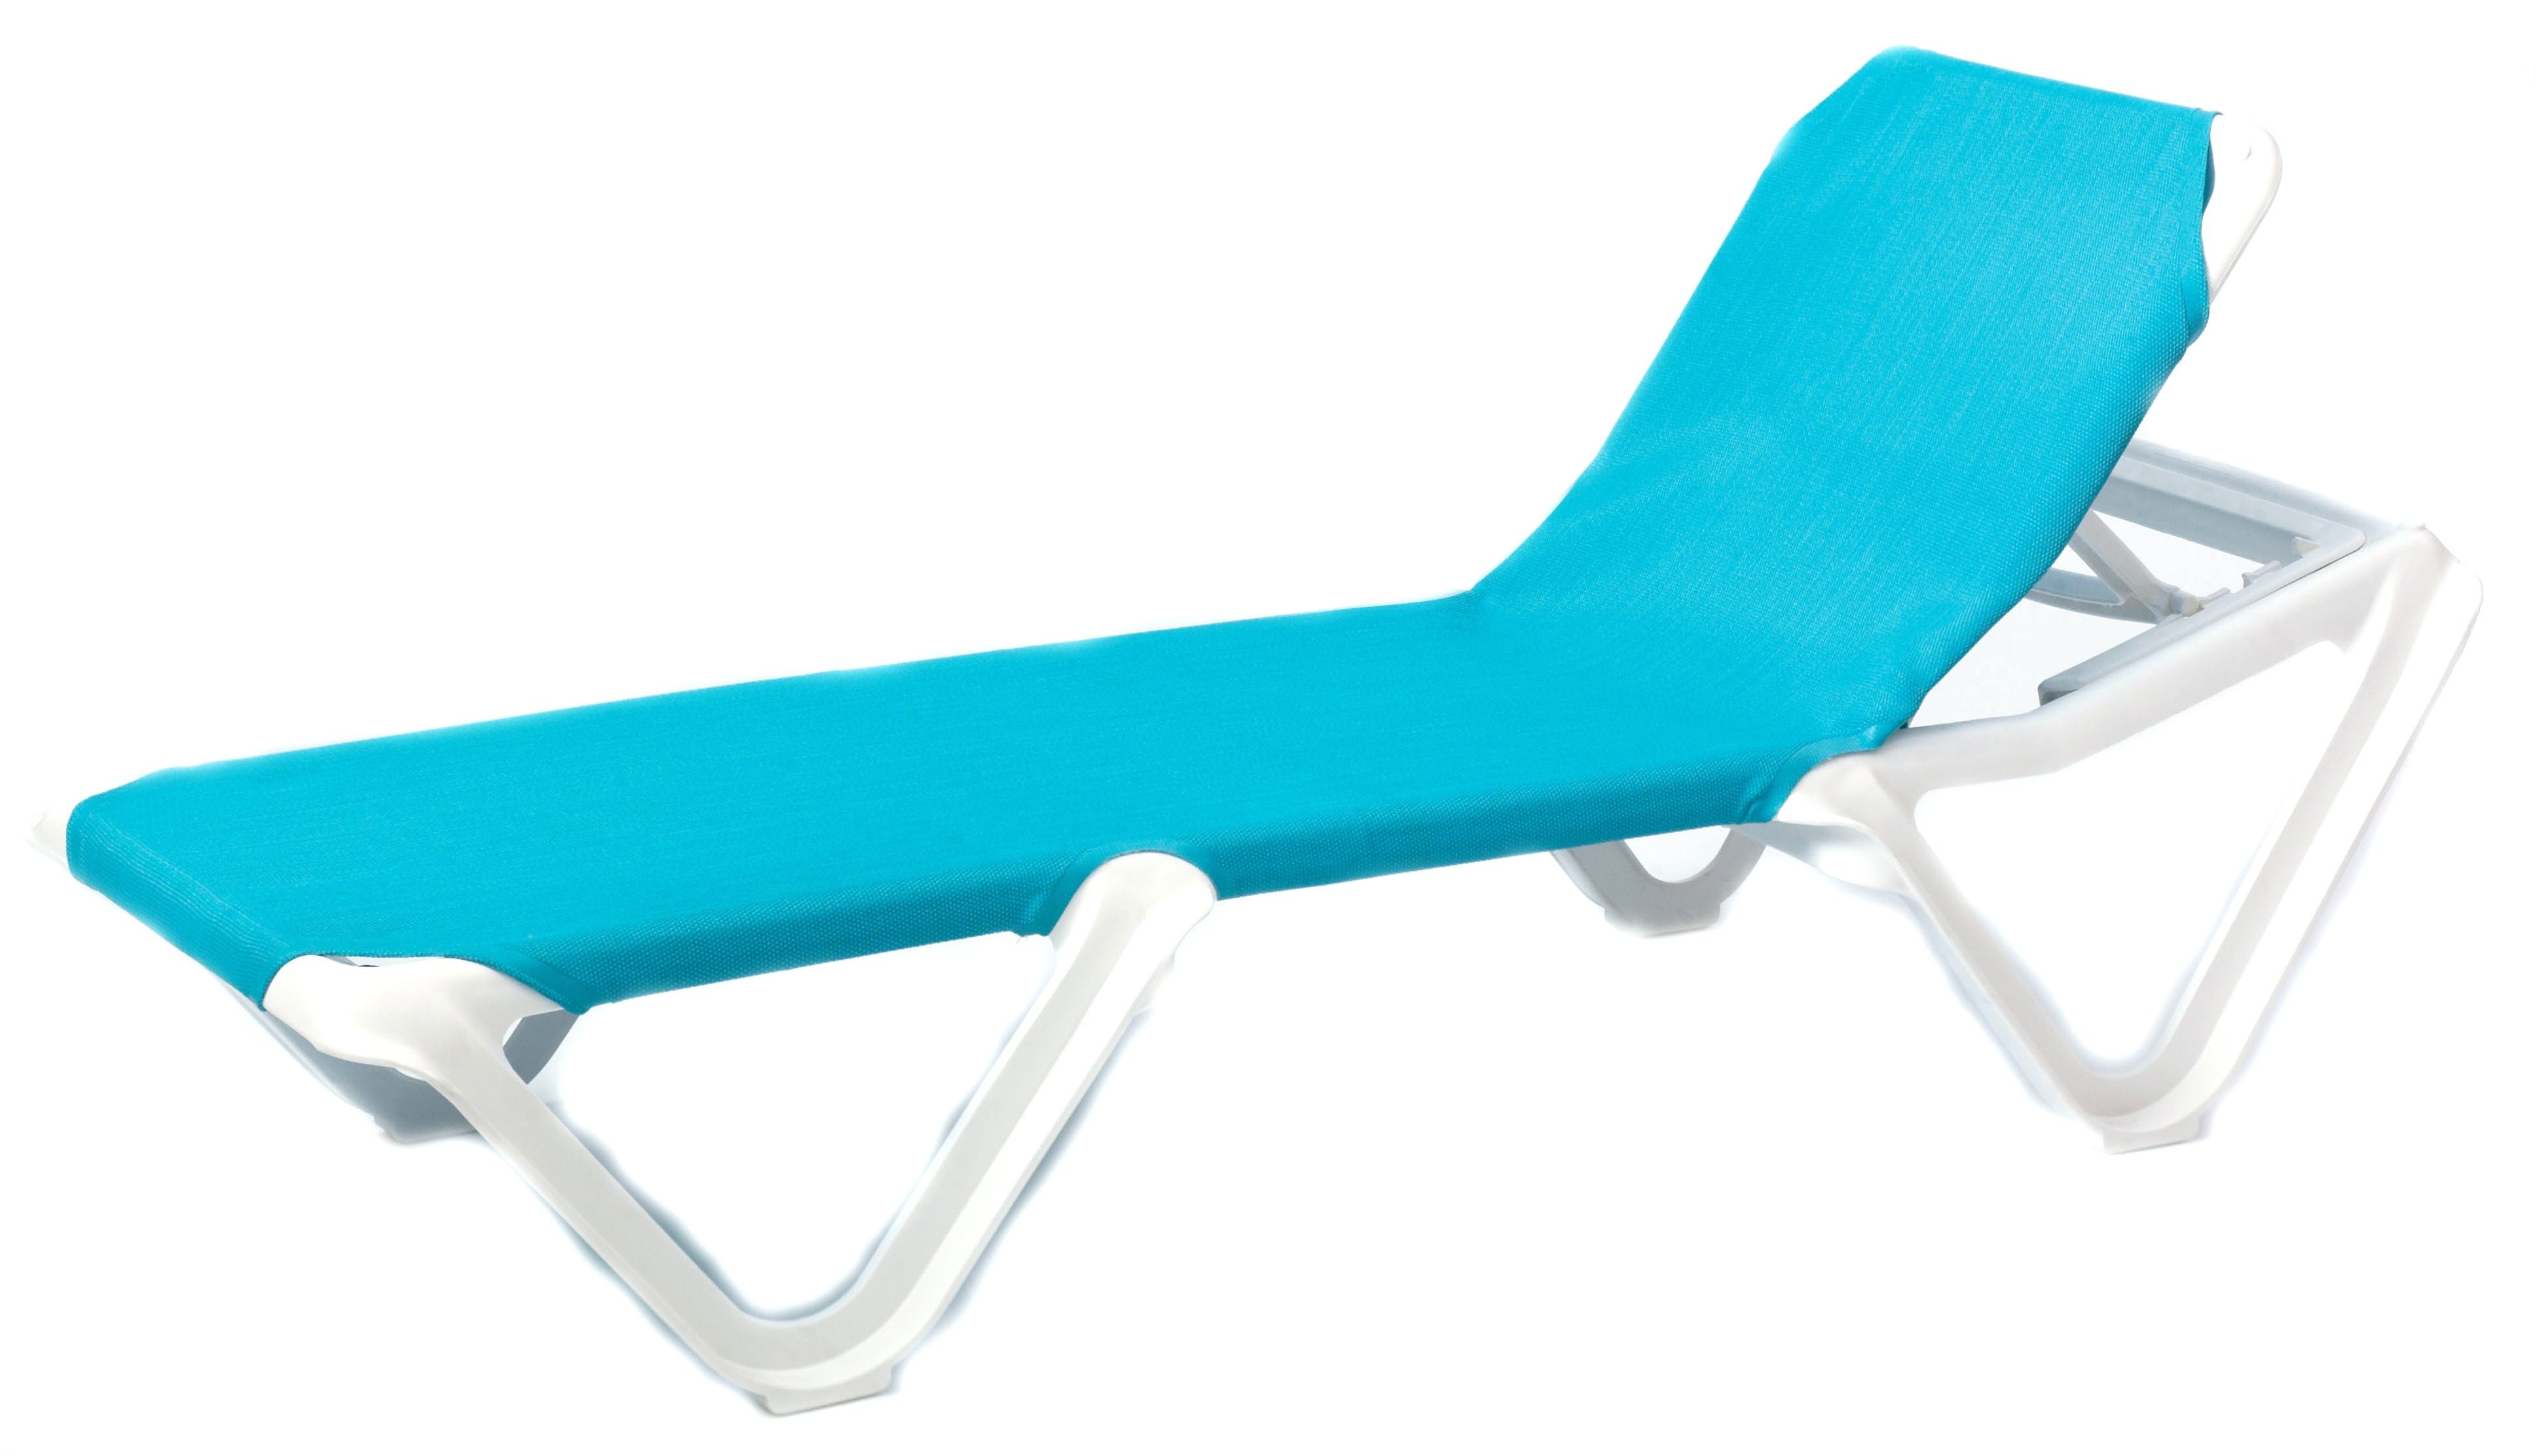 Commercial Grade Outdoor Chaise Lounge Chairs With Regard To Popular Hard Plastic Chaise Lounge Chairs • Lounge Chairs Ideas (View 15 of 15)